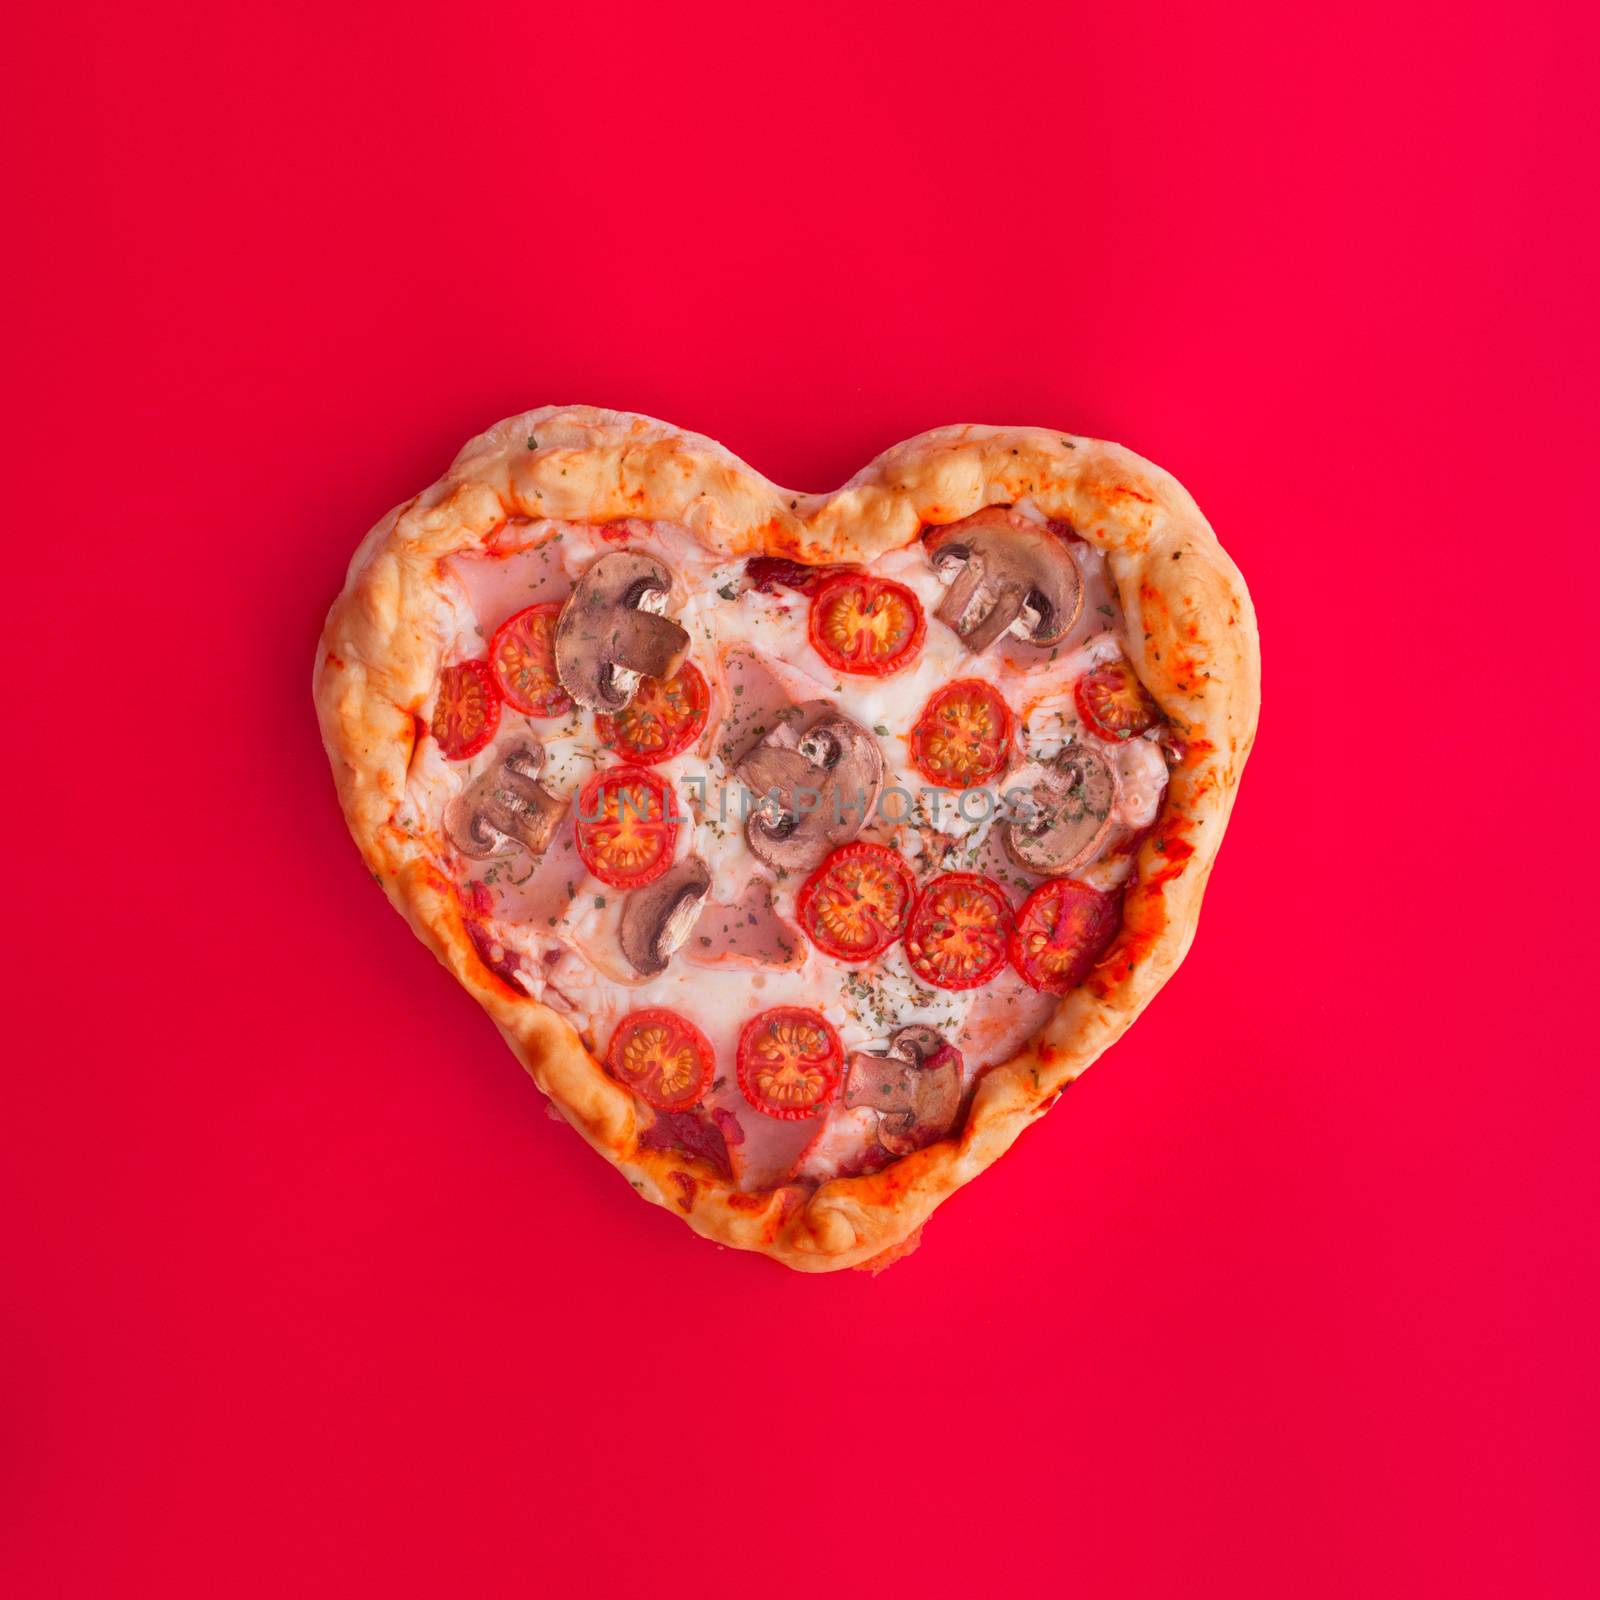 Pizza heart shaped with ham tomatoes and mushrooms on red background. Concept of romantic love for Valentines Day . Love food